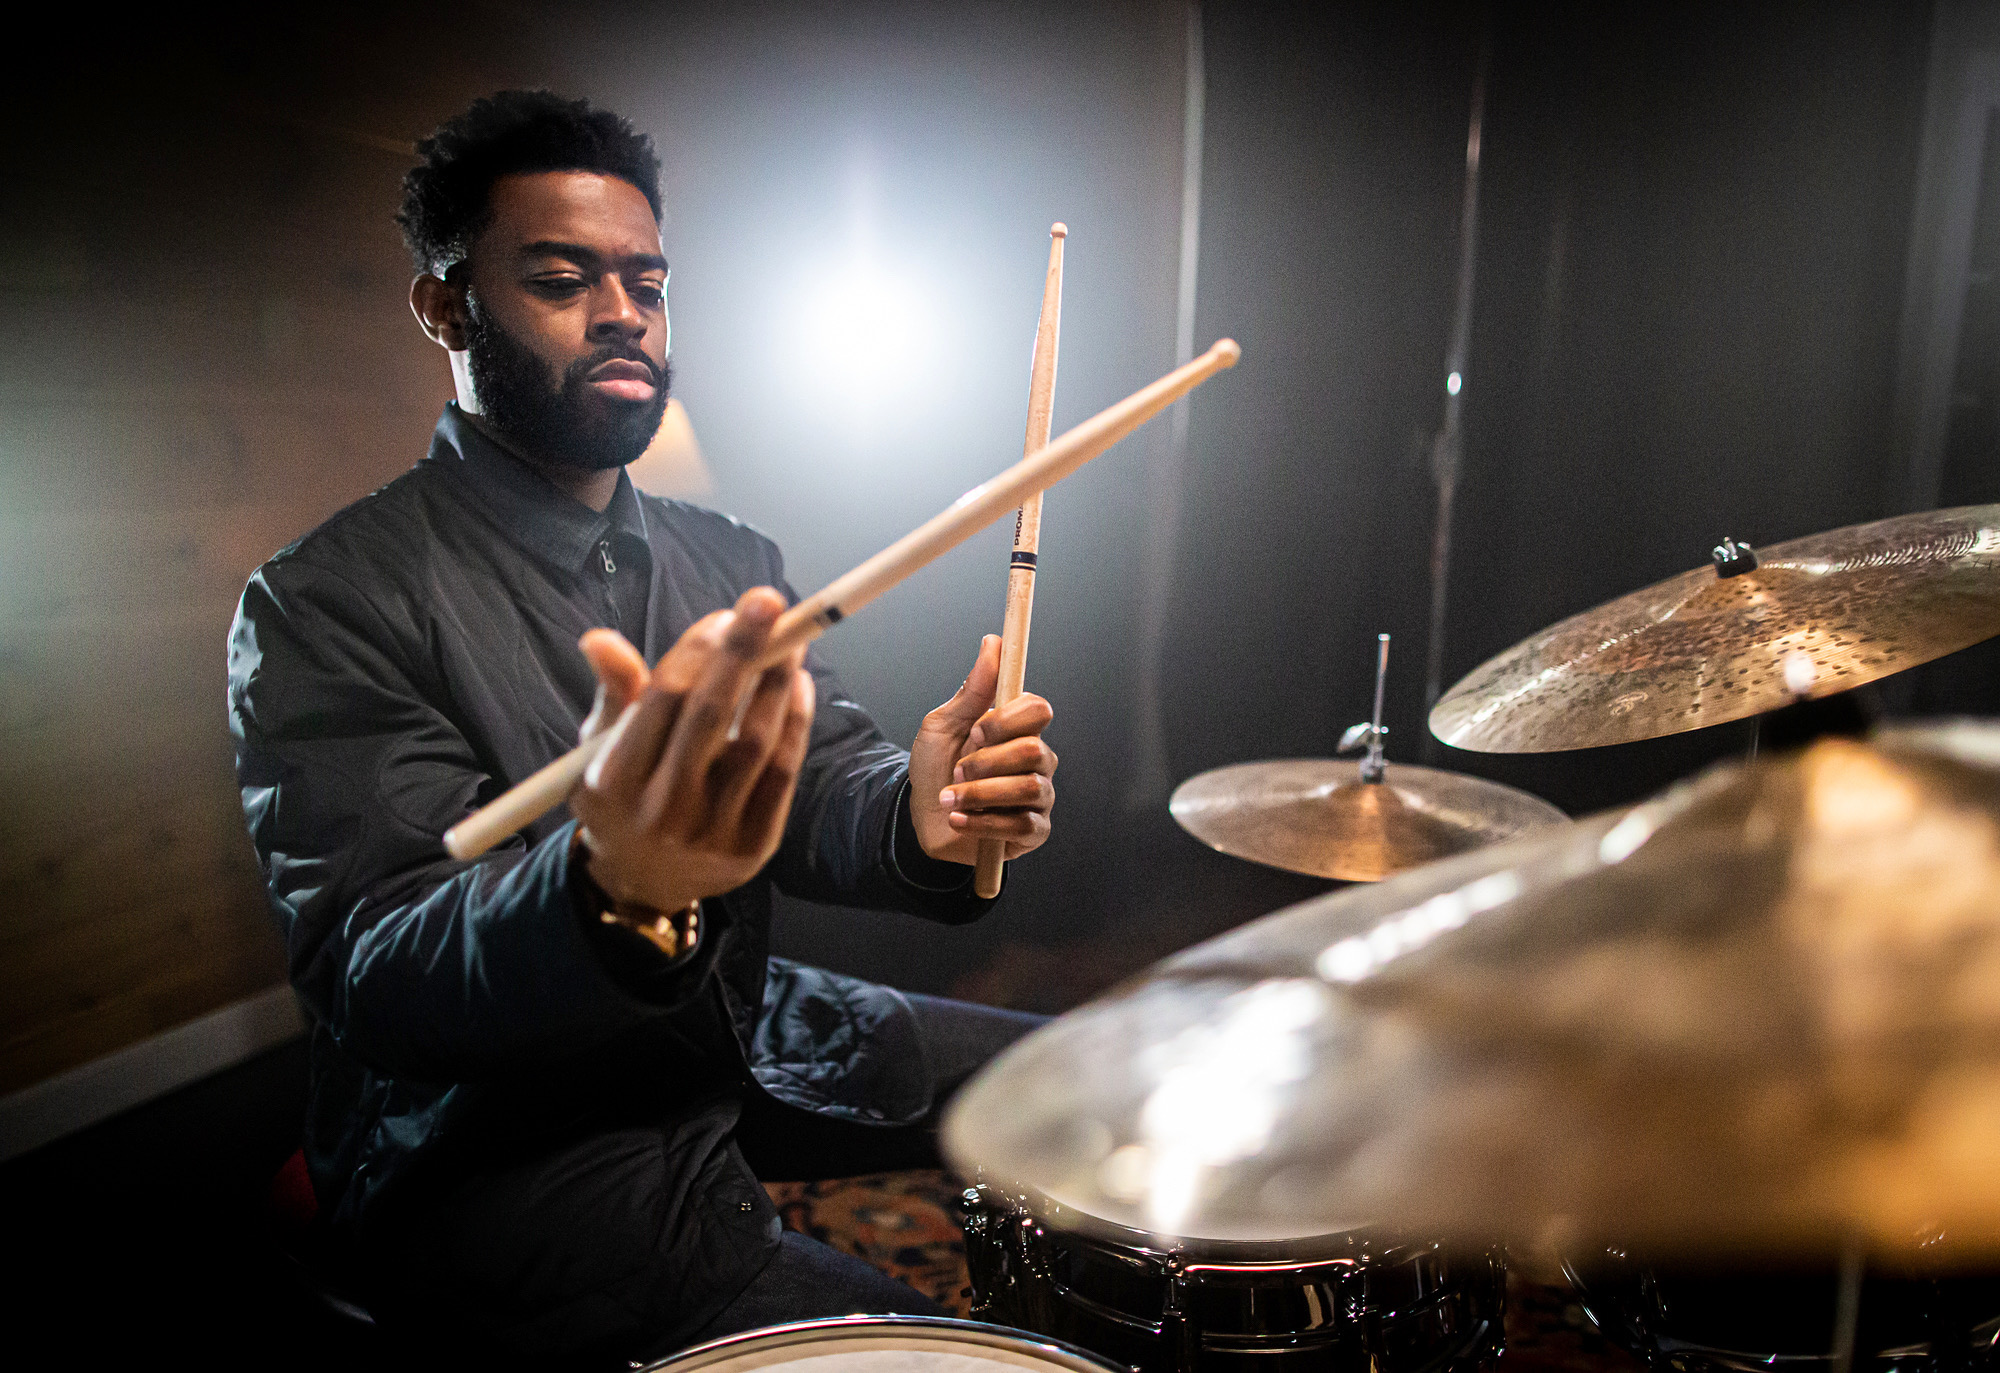 A Black man with a beard, wearing a black top, holds two drumsticks and plays a drum set